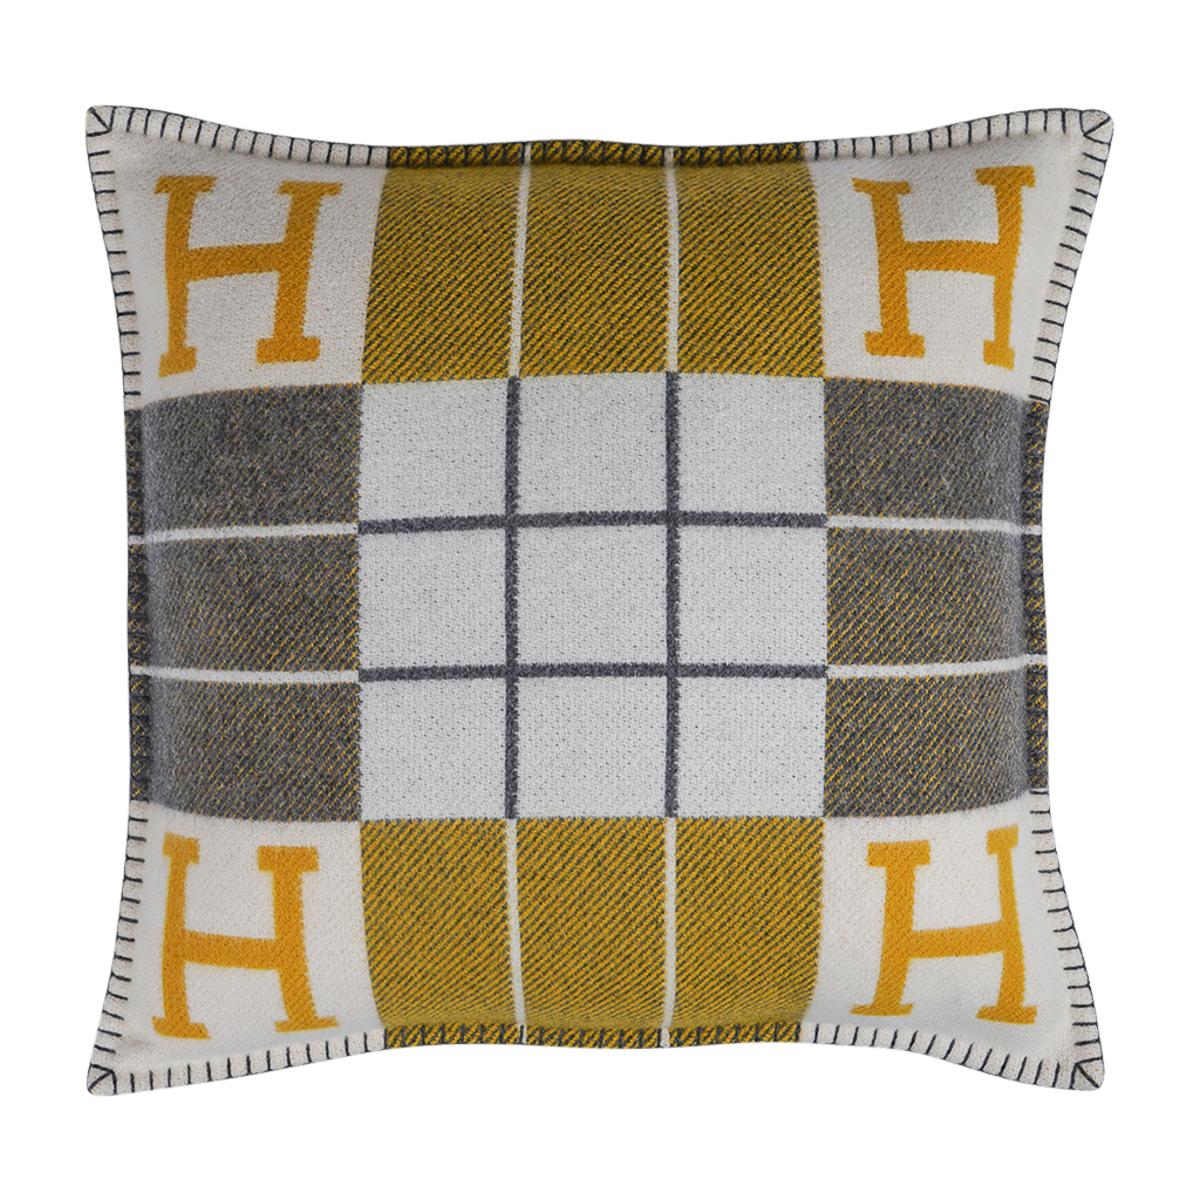 Mightychic offers set of two (2) Hermes classic Small Model Avalon signature H pillow featured in Soleil and Gris.
The removable covers are created from 90% Wool and 10% cashmere and has whip stitch edges.
Comes with sleepers.
Matching blanket is